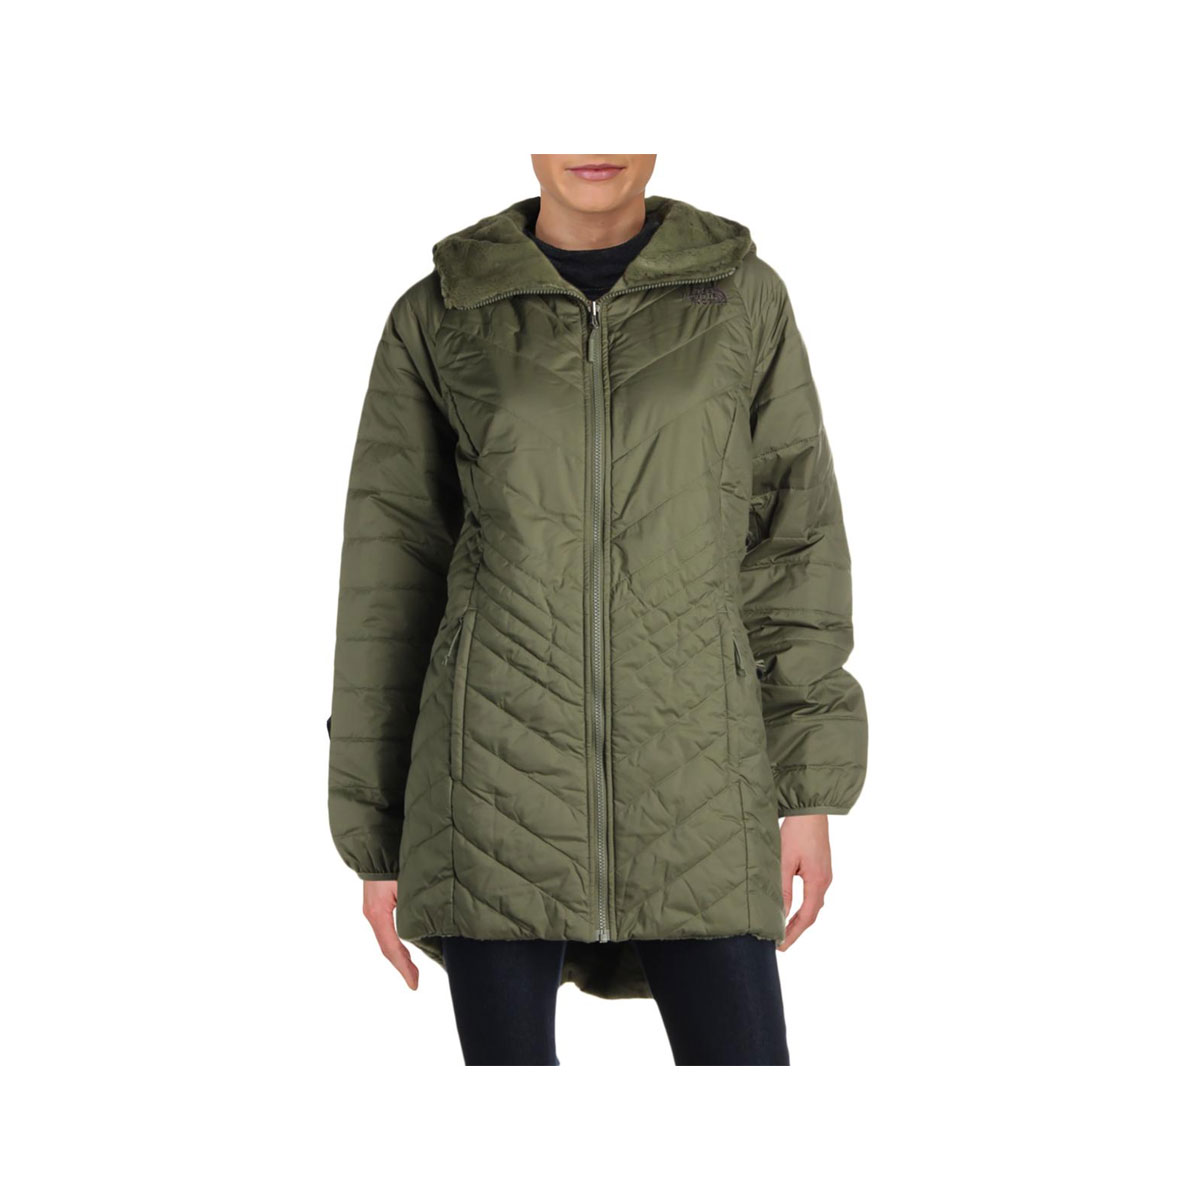 The North Face Women's Mossbud 